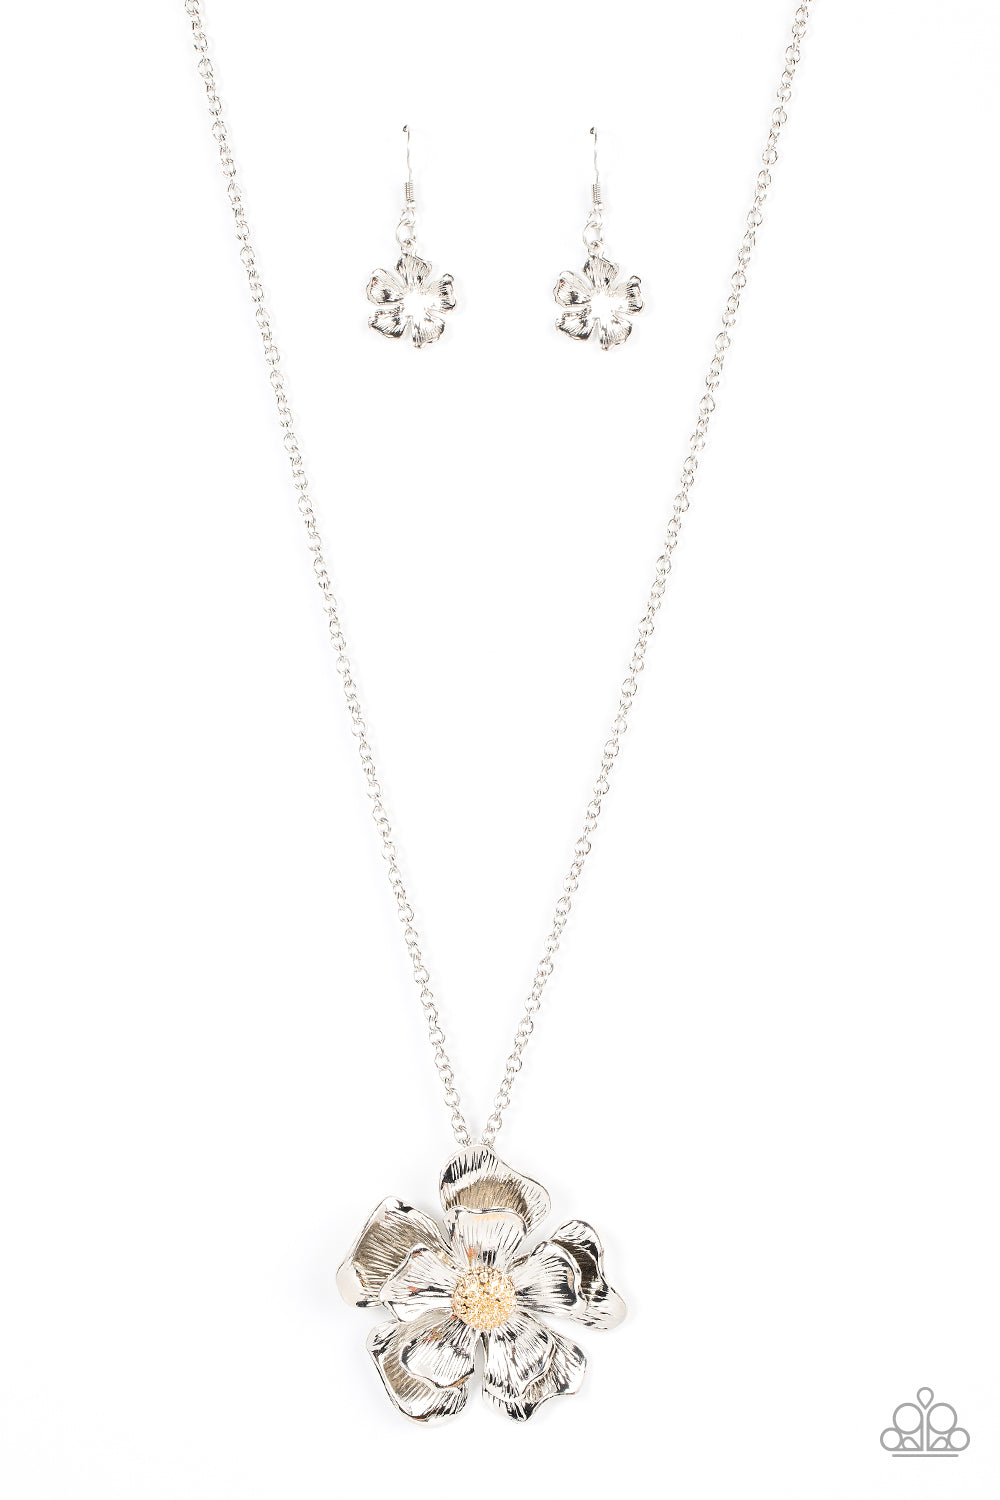 Layers of scalloped and textured silver petals bloom from a studded gold beaded center. The oversized flower swings from the bottom of an extended silver chain, resulting in an eye-catching floral pendant. Features an adjustable clasp closure.  Sold as one individual necklace. Includes one pair of matching earrings